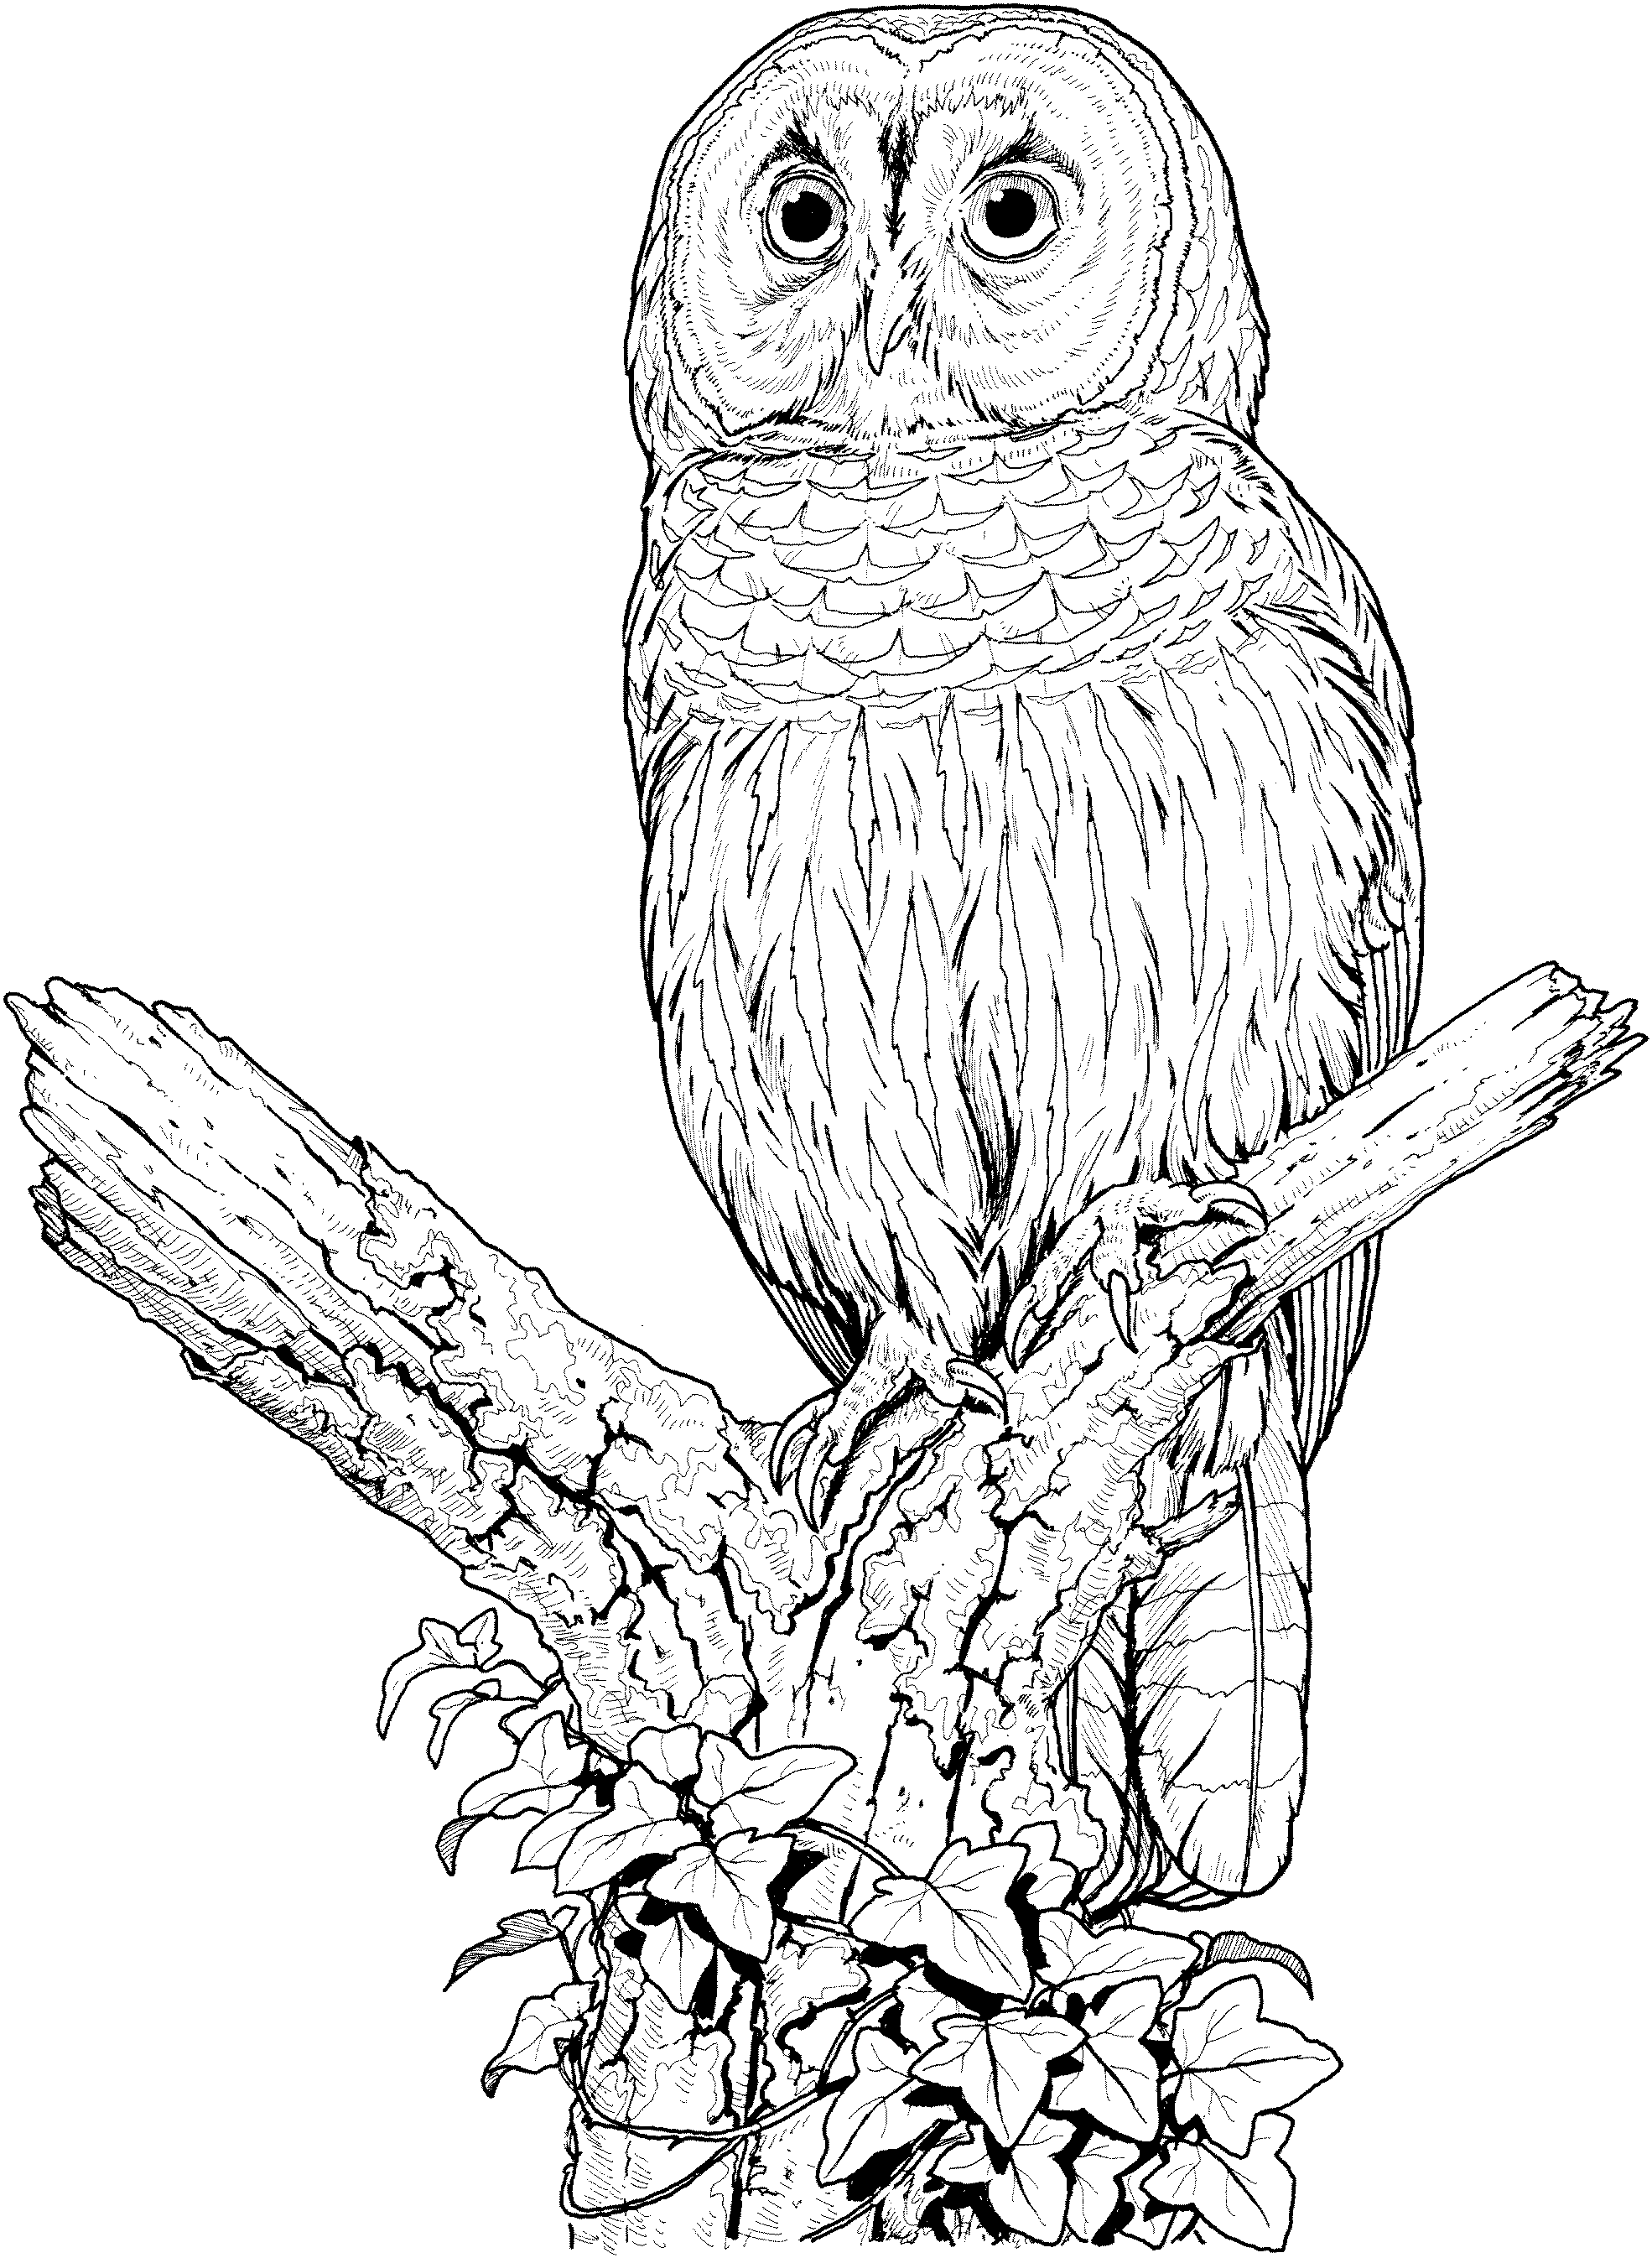 owl color page owls animal coloring pages pictures color owl page 